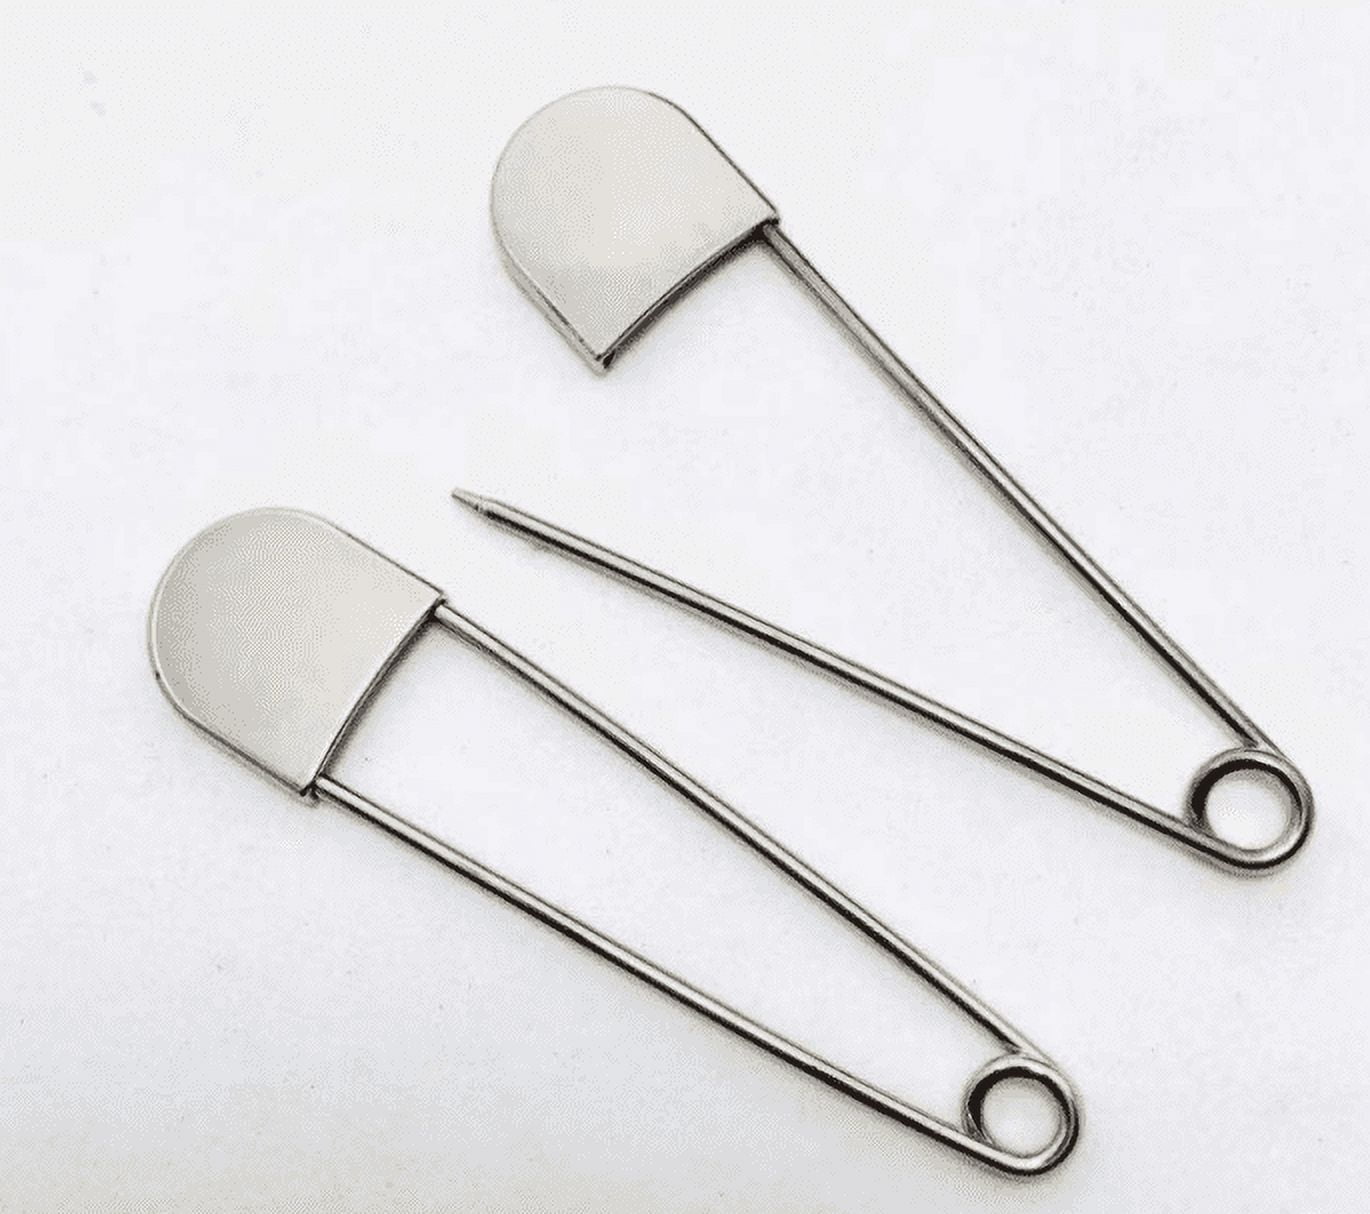  6 Piece Stainless Steel Heavy Duty Safety Pins, Bulk Extra  Large Heavy Duty Power Pins for Blankets, Skirts and Kilt Sewing Crafts  Fashion Decorations